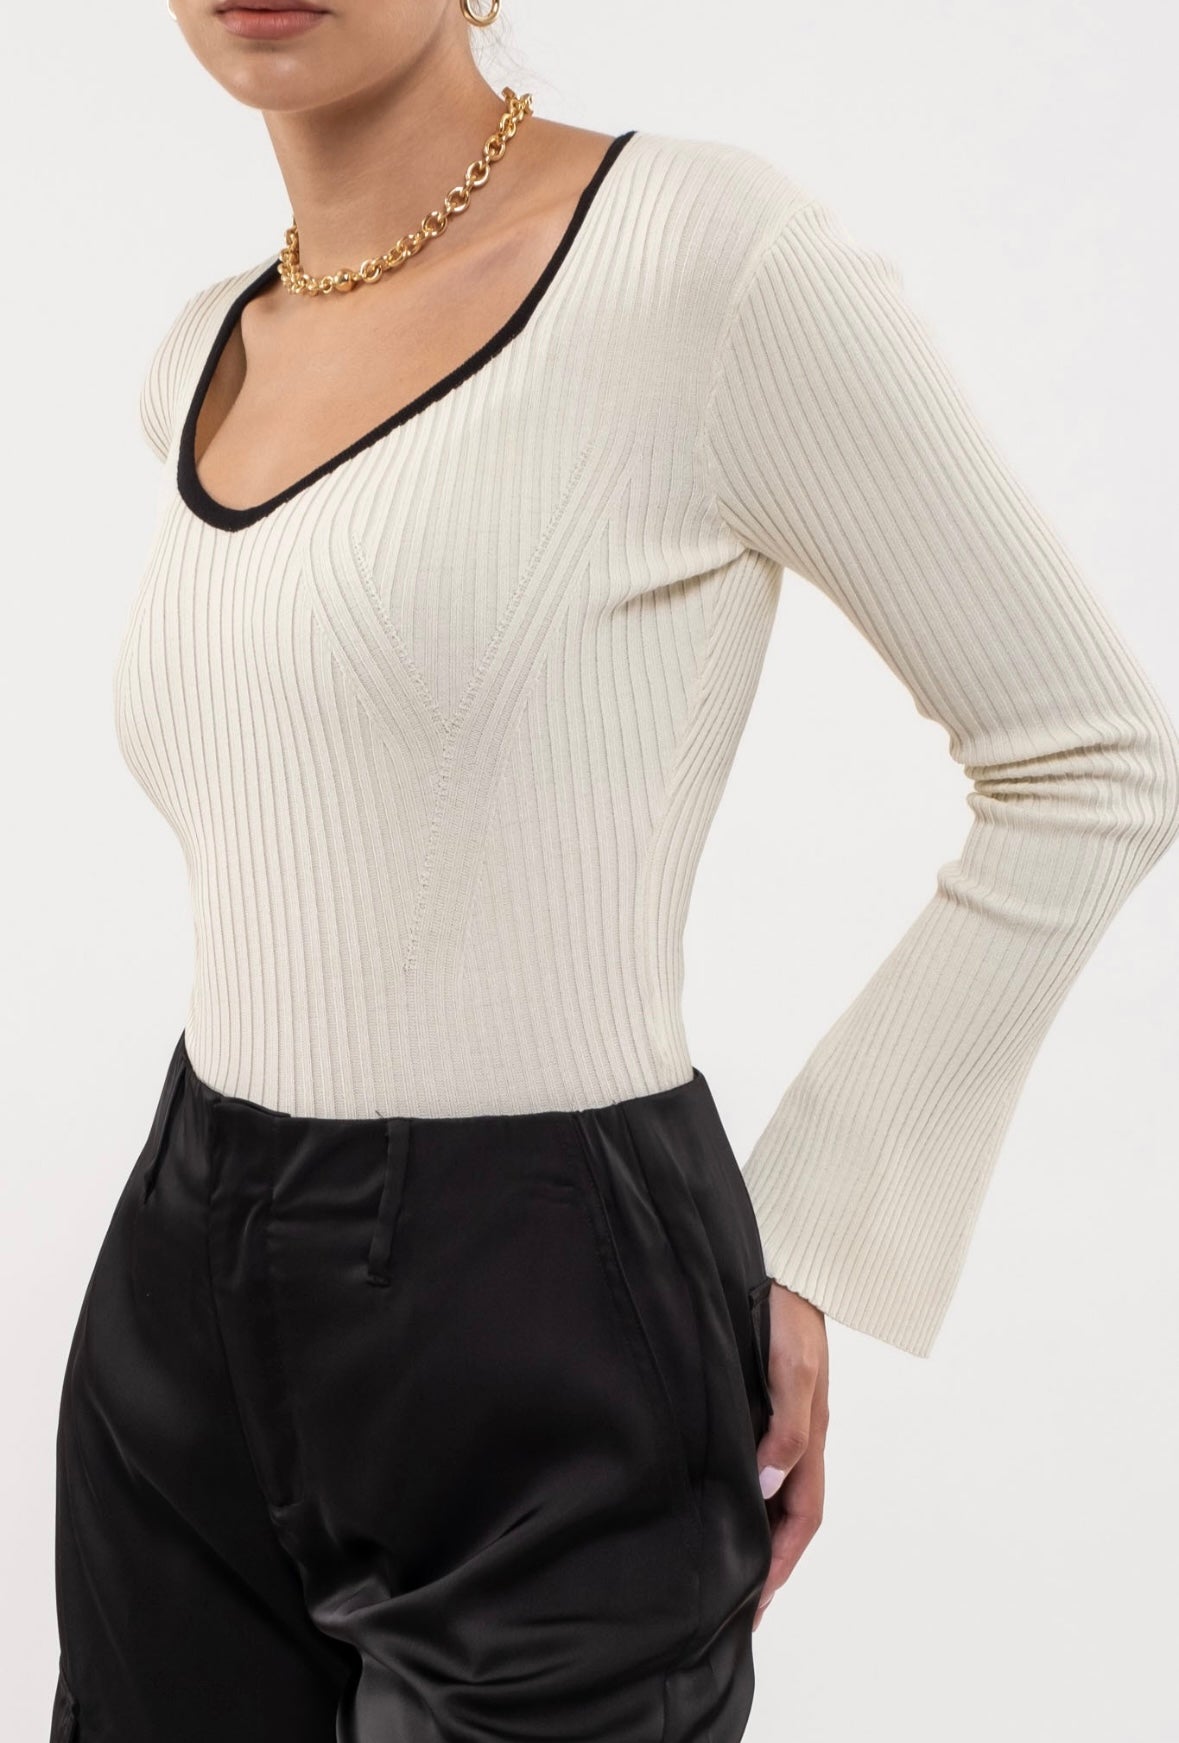 TWO STYLES - Contrast Scallop Hem Knit Top